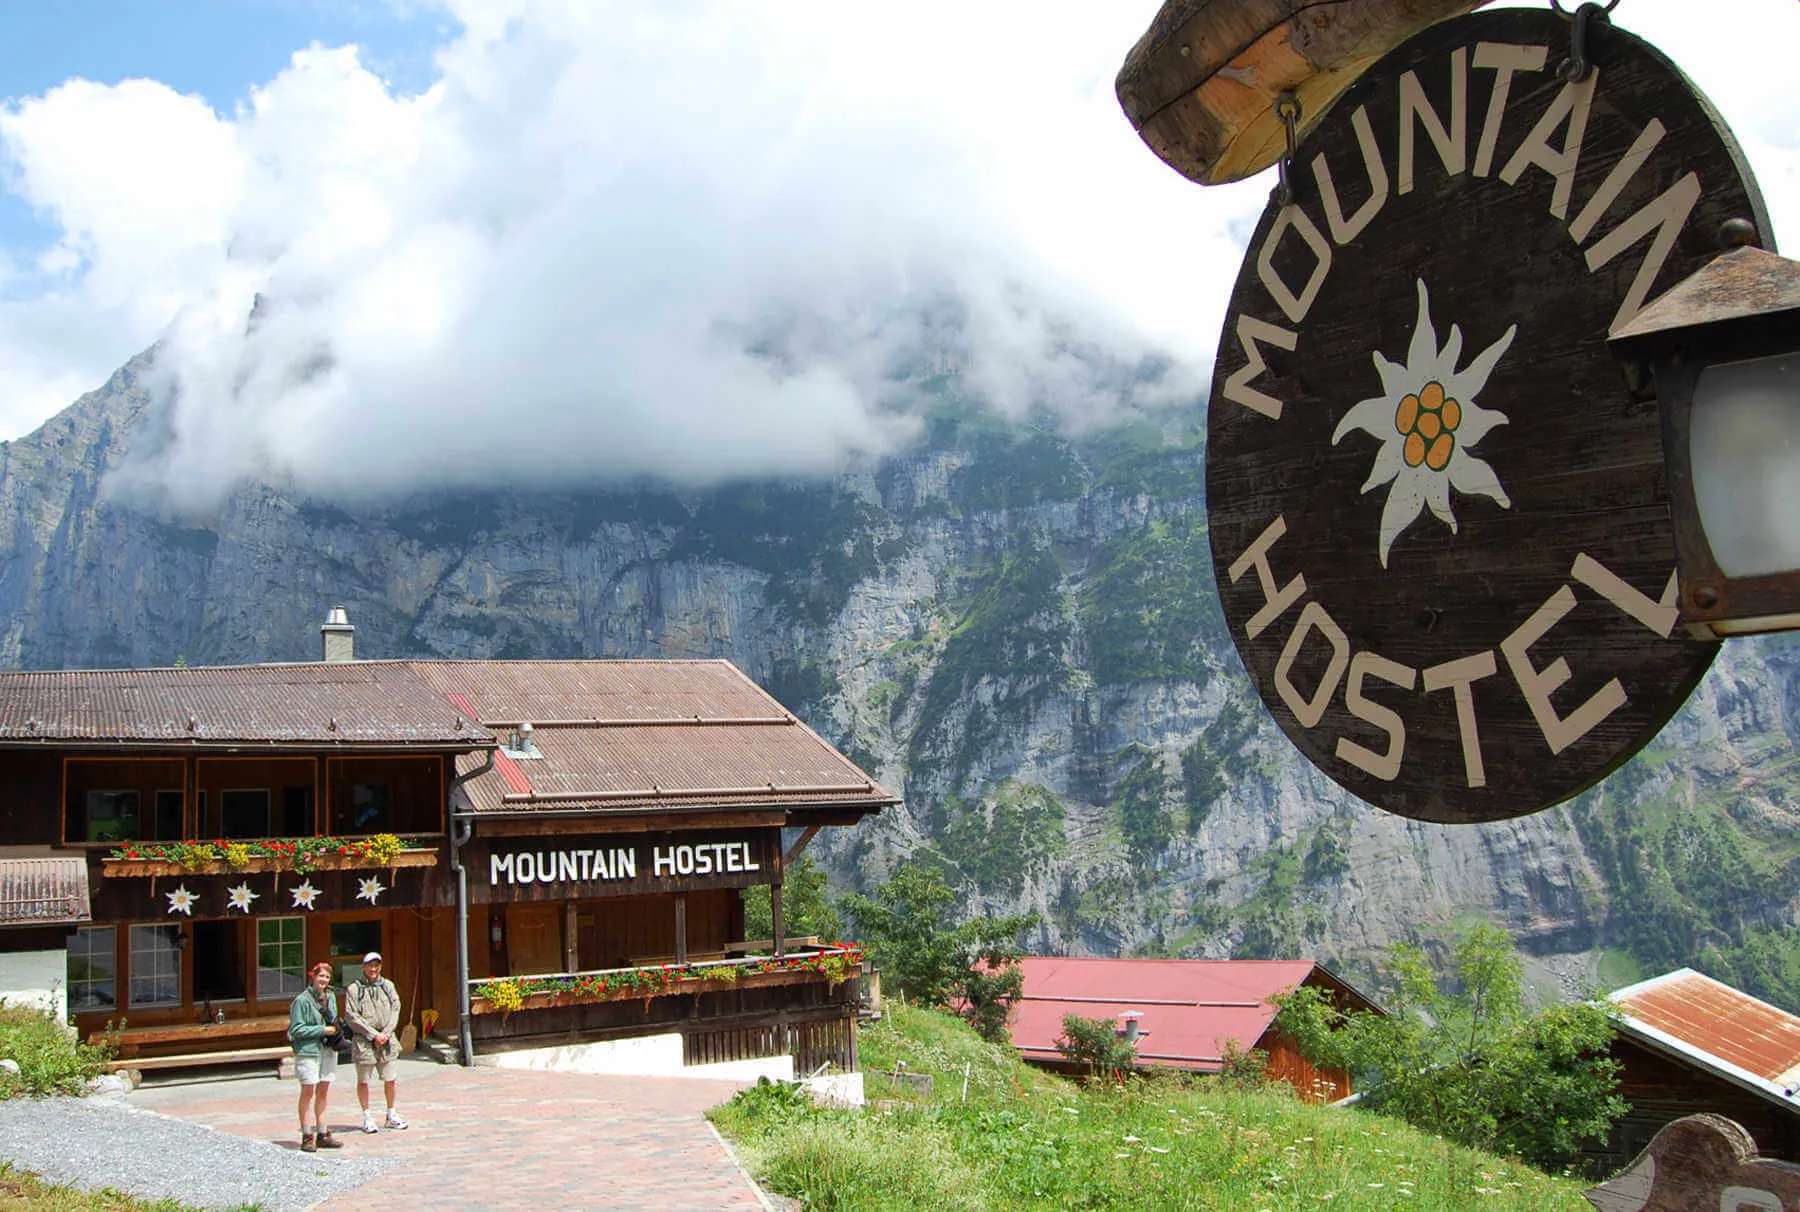 Some hostels are really travel destinations, such as the Mountain Hostel in Gimmelwald, Switzerland